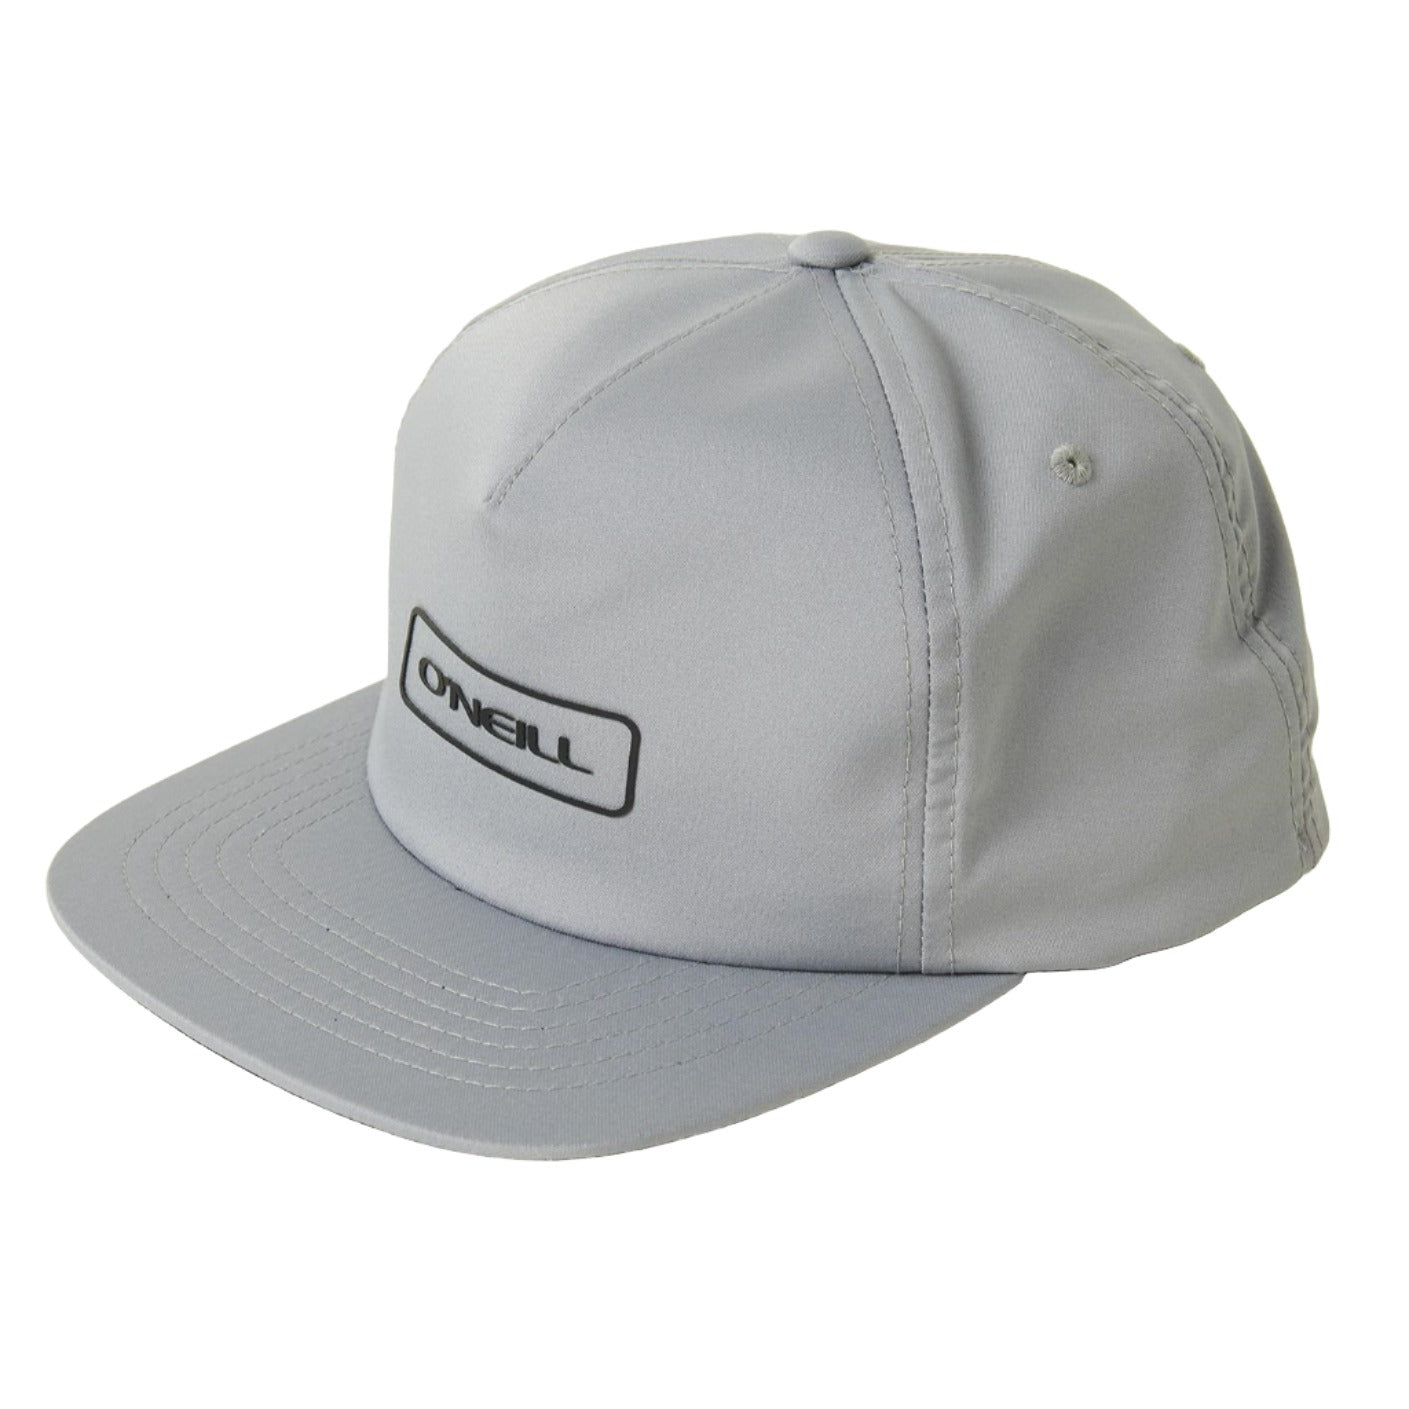 O'Neill Hybrid Snapback Hat (Non-Current)